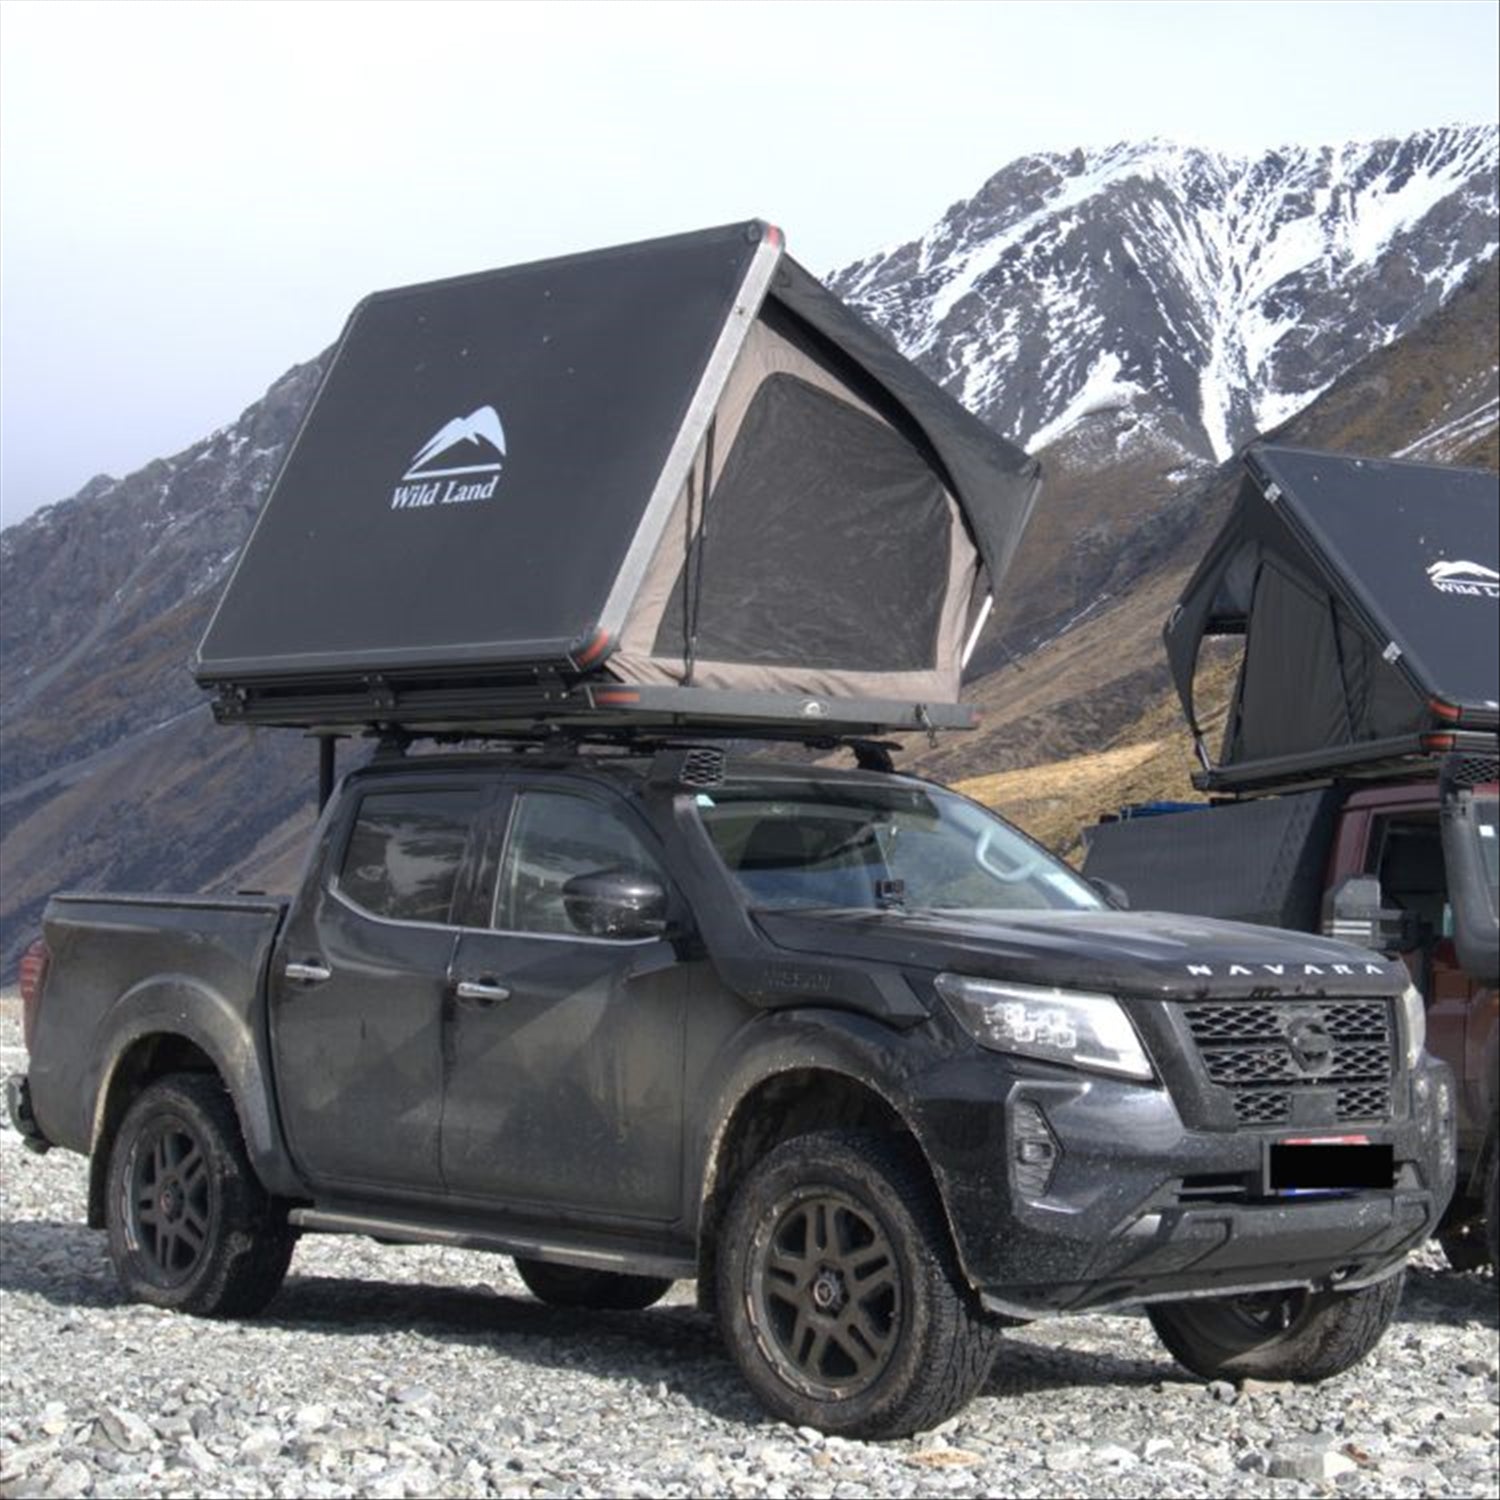 Wild Land DC2 Aluminium Hard Shell Roof Top Tent includes free cargo racks - 120cm or 140cm wide